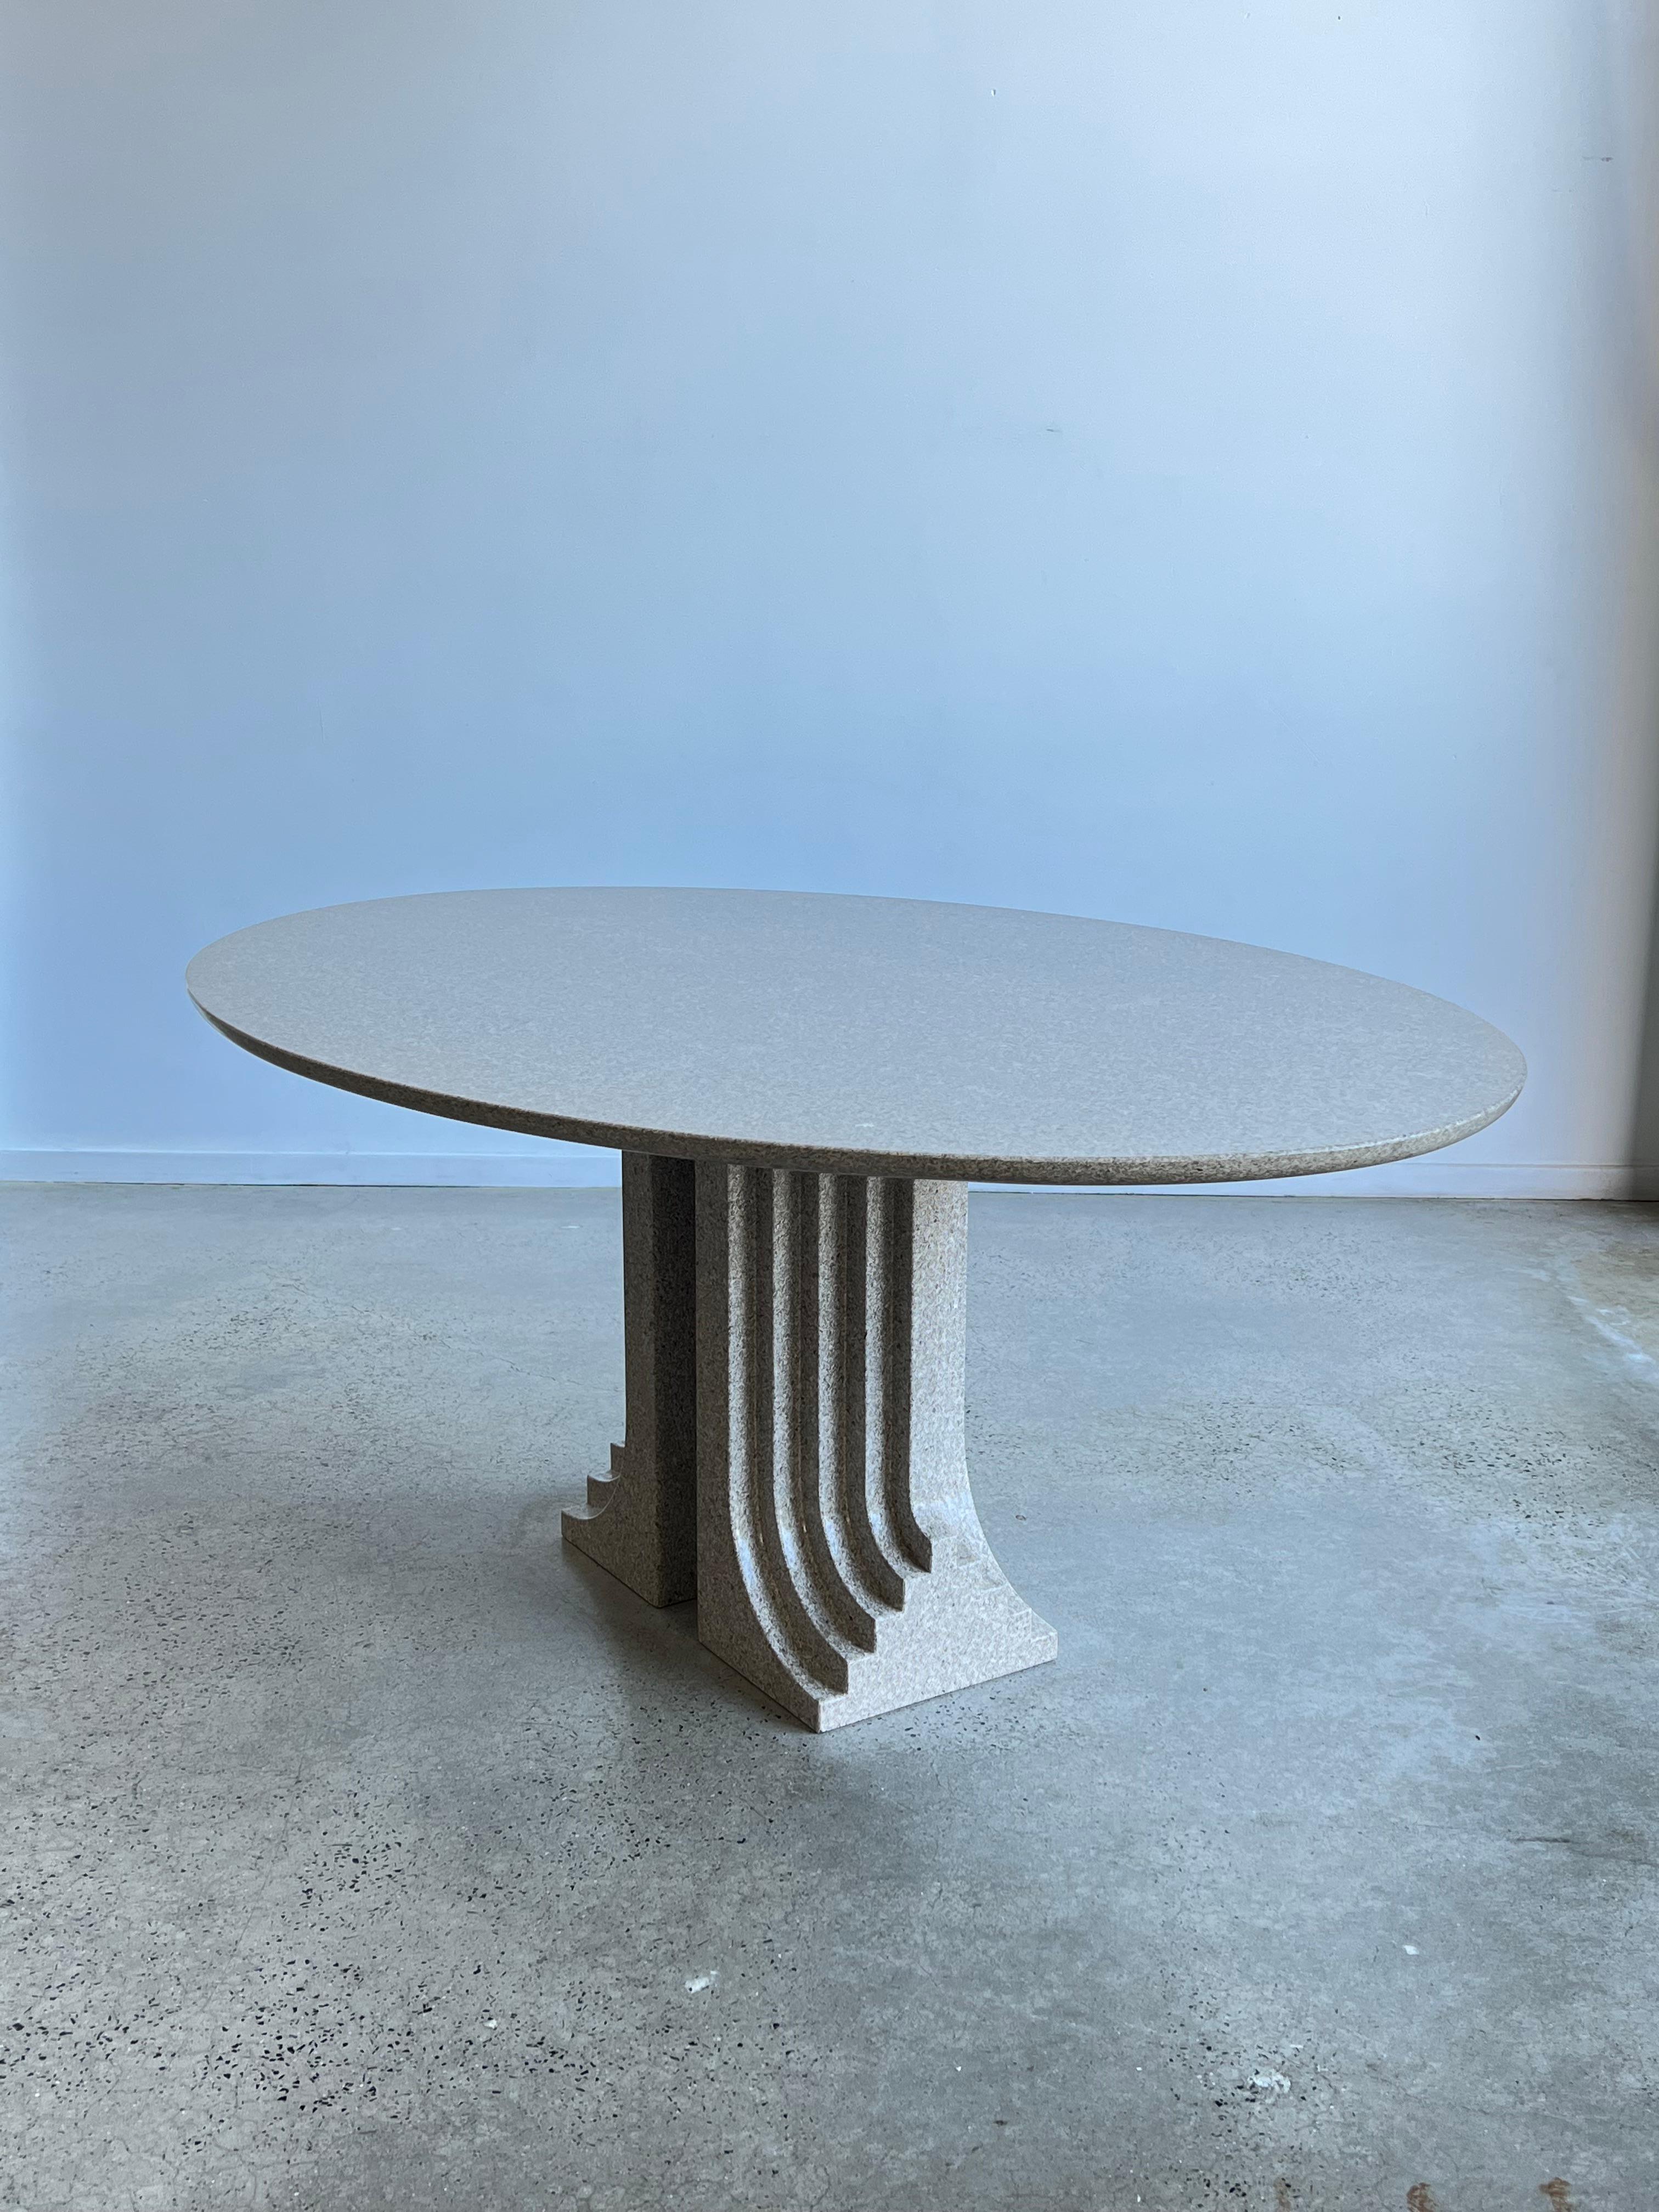 The Scarpa's way of thinking the architecture is particularly visible in this piece. The “Samo” dining table, designed in 1971 for 'Ultrarazionale' collection by Simon Gavina, consists of two grooved solid Granite pillars and a single floating oval